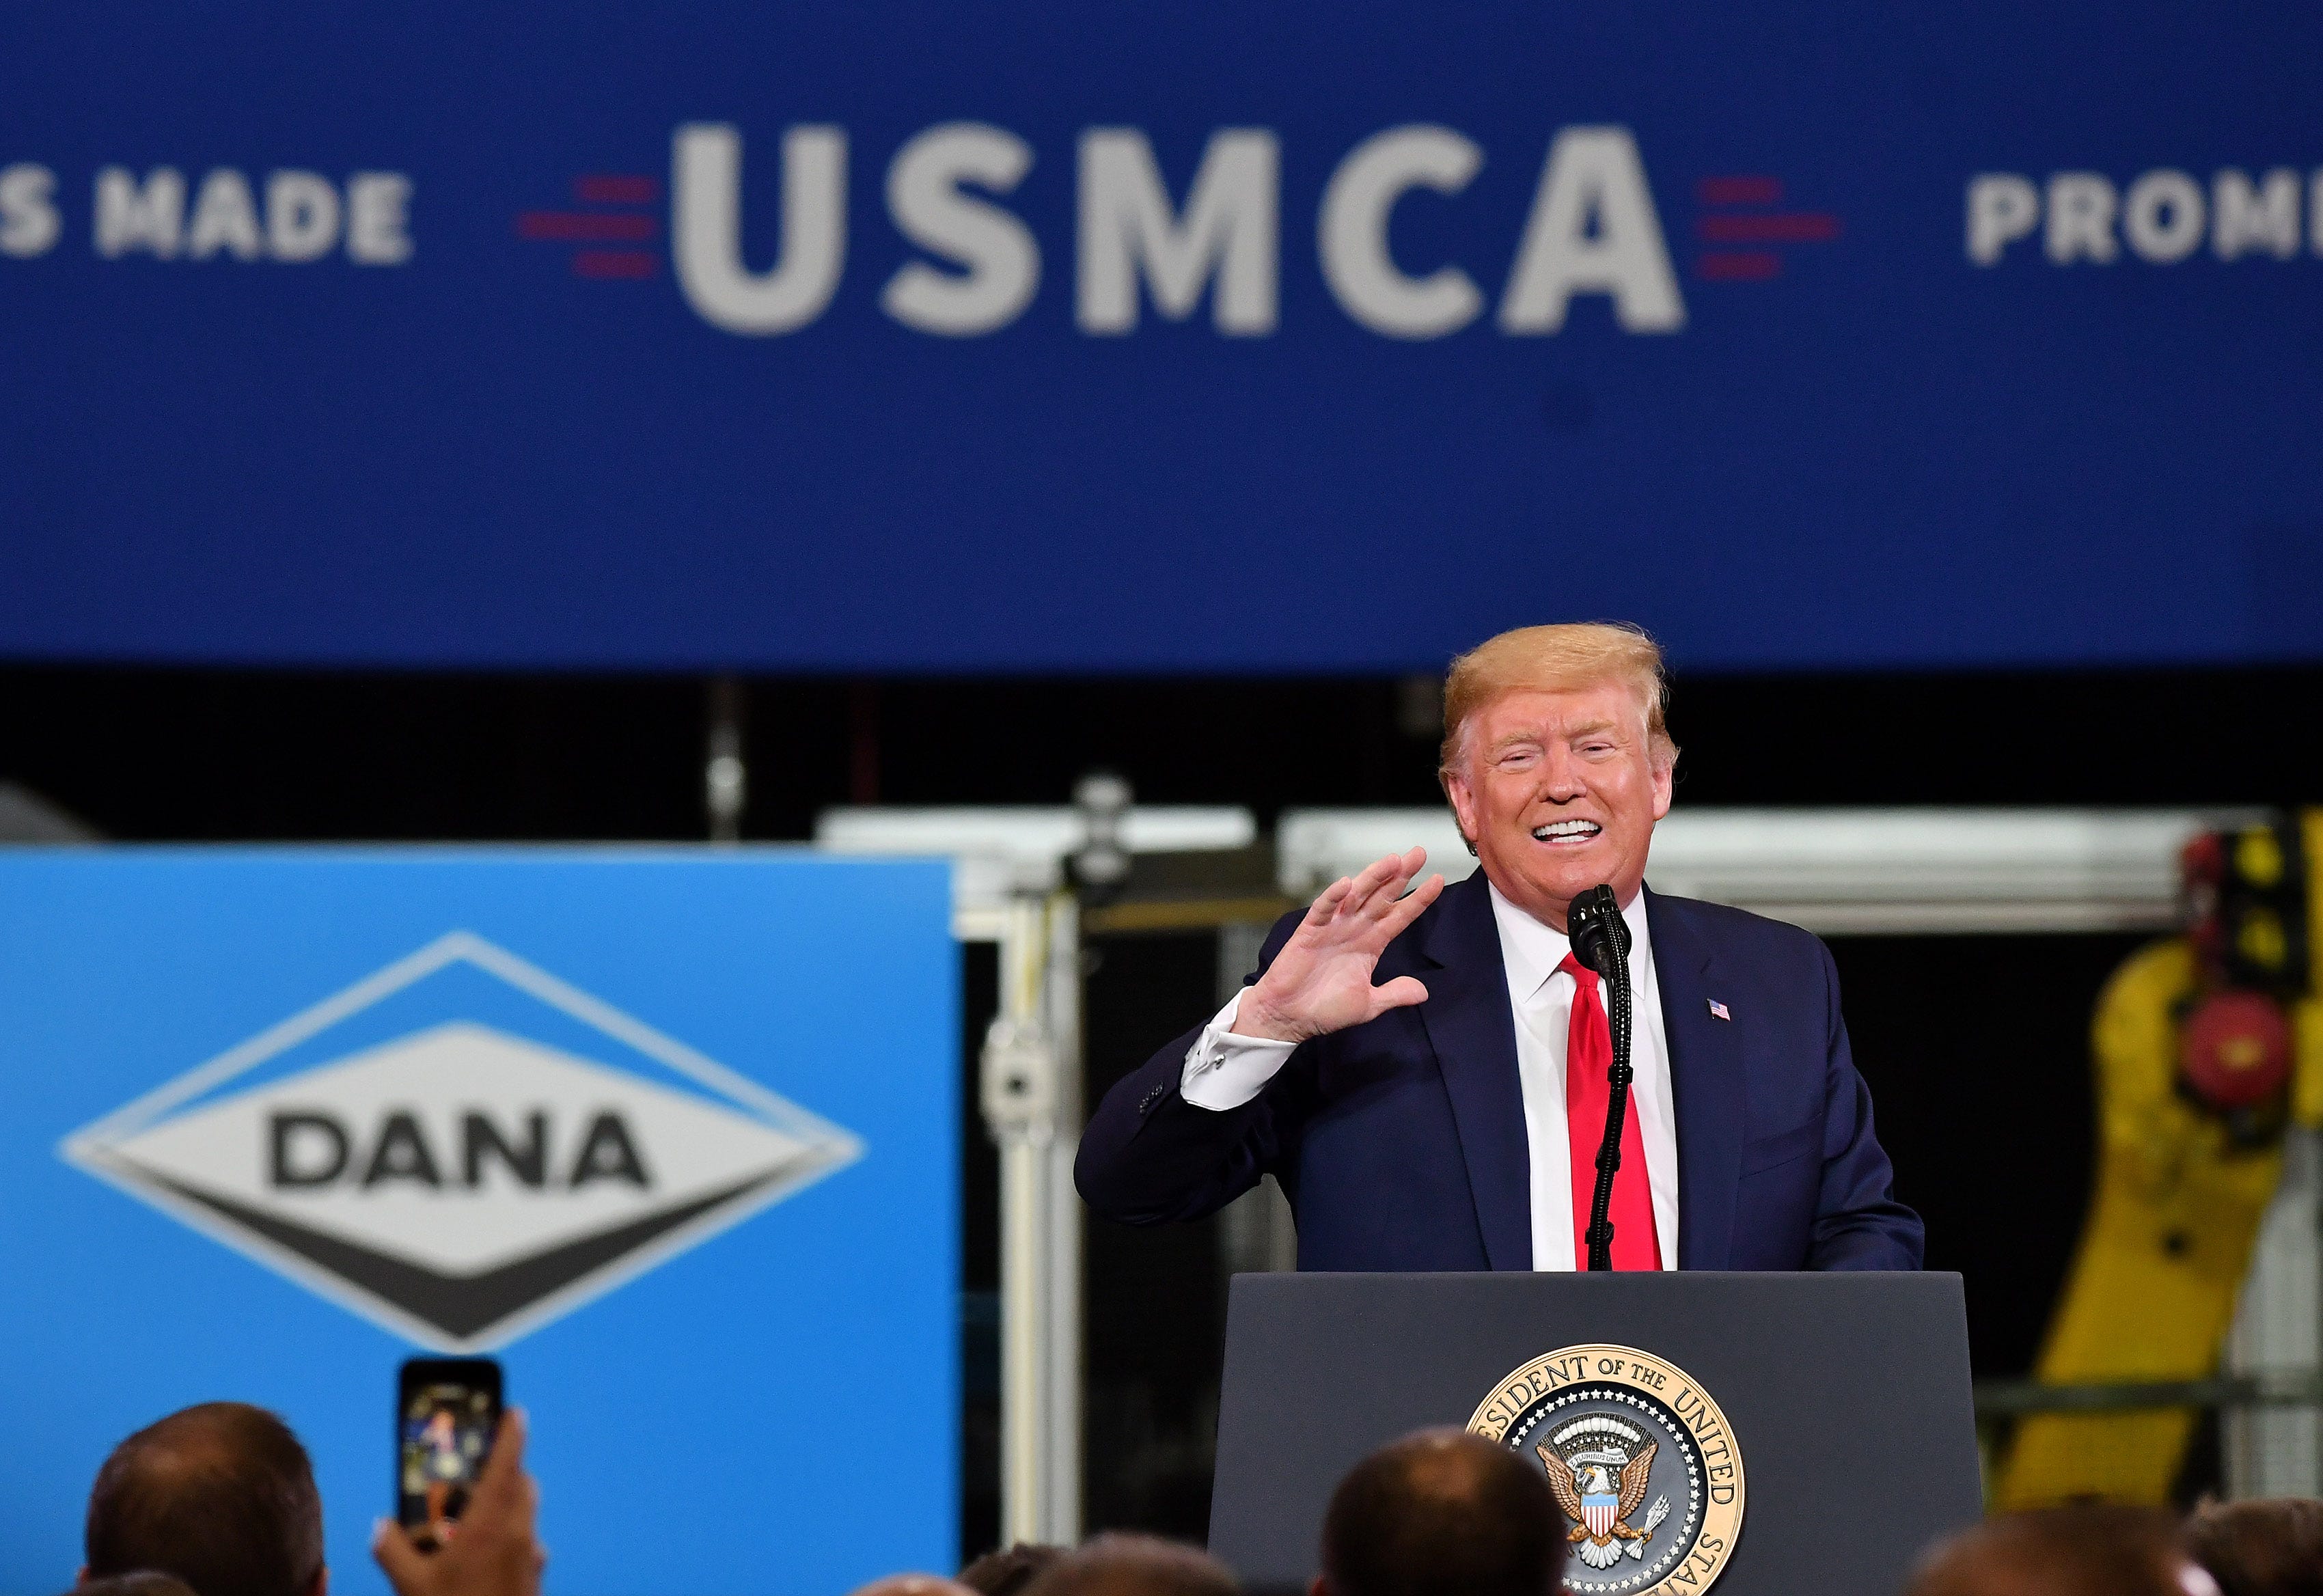 President Donald Trump gives remarks at Dana Incorporated in Warren, Mich. on Jan. 30, 2020.